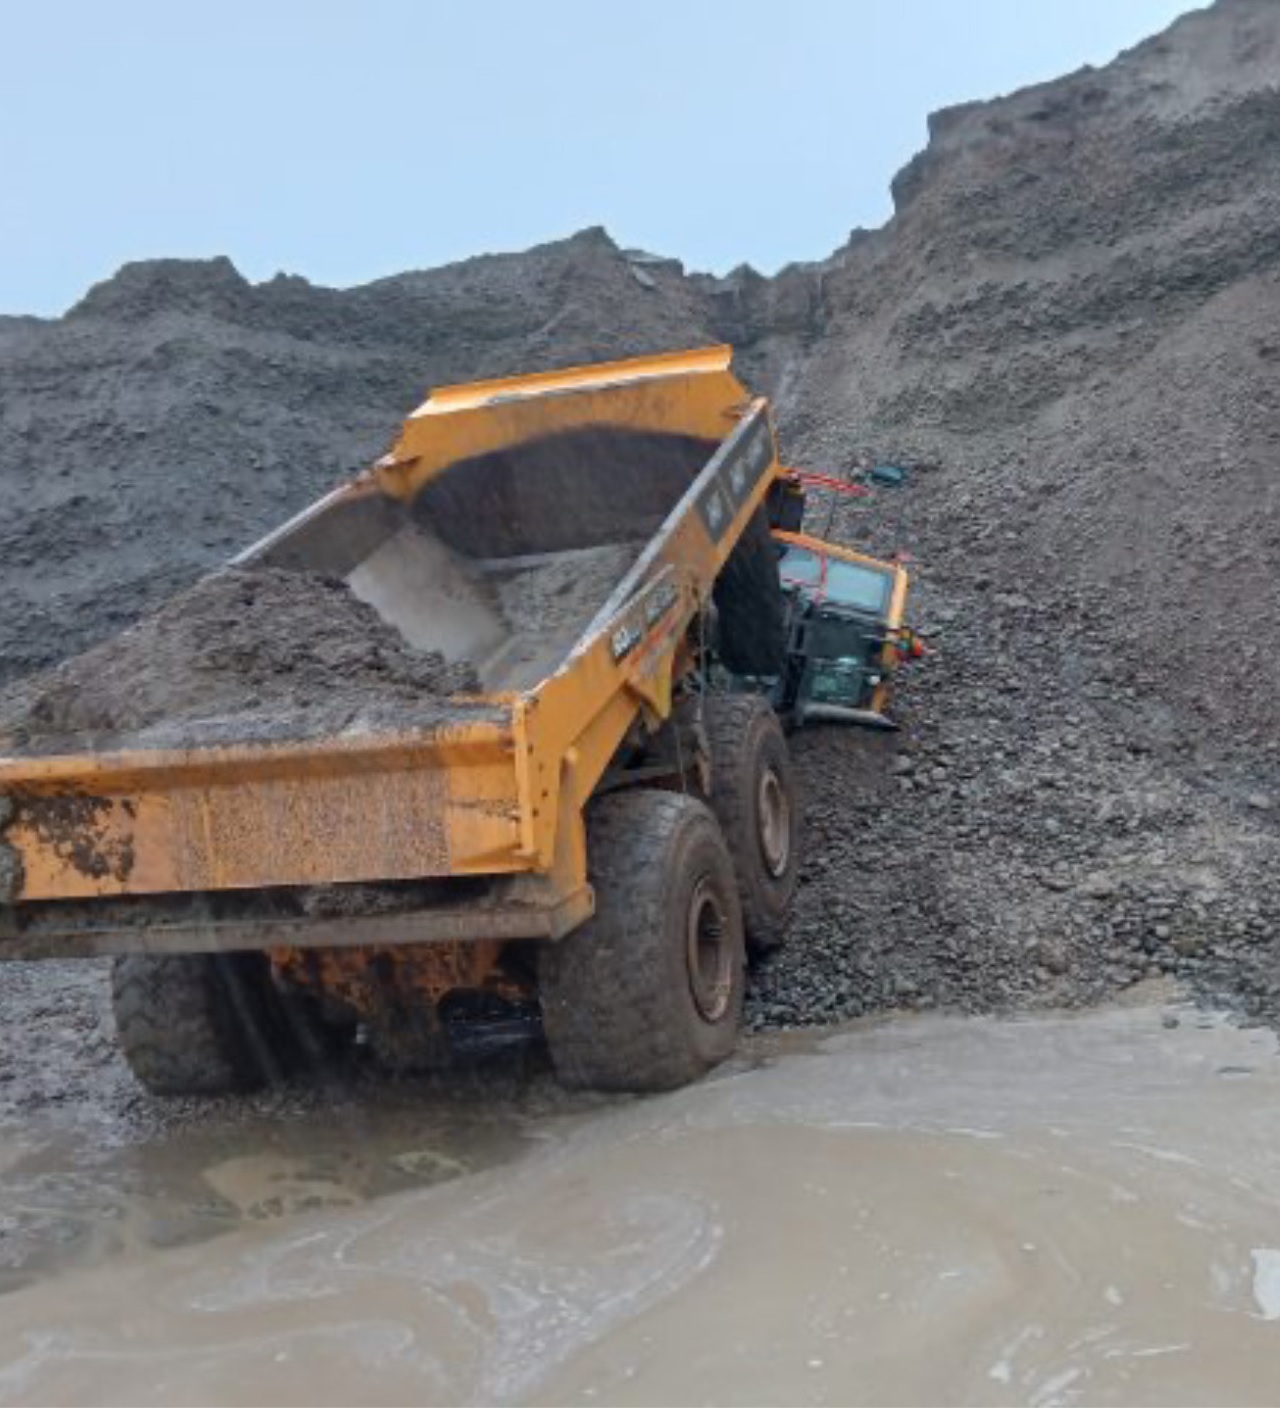 [image] articulated dump truck on the quarry floor